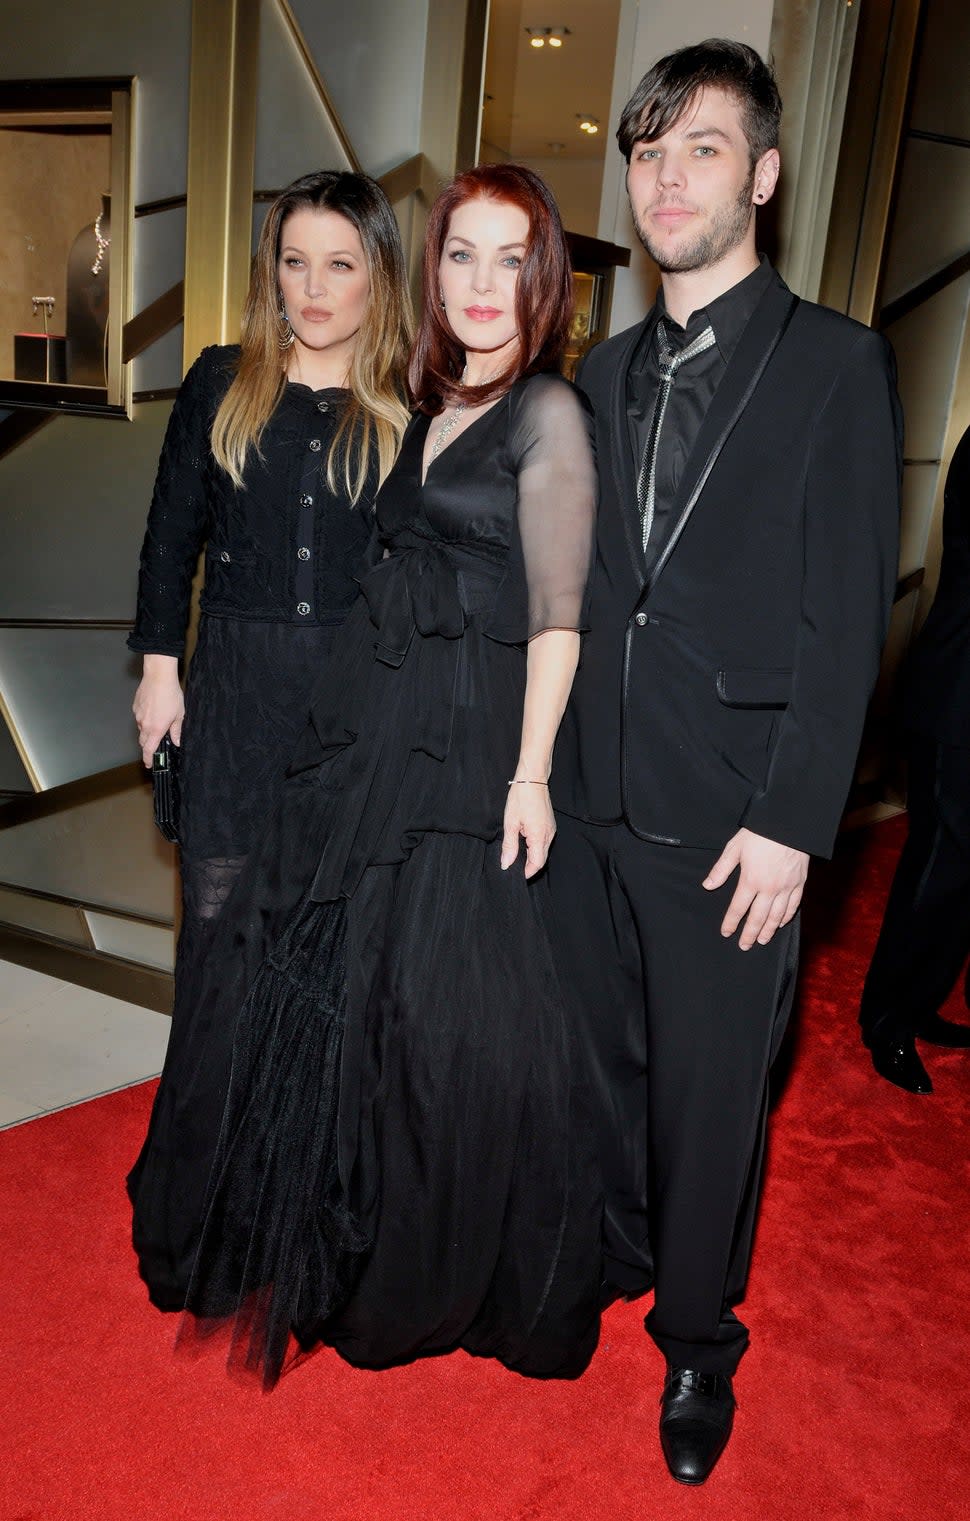 Lisa Marie Presley, Priscilla Presley and Navarone Garcia at a fundraiser for the Nevada Ballet in January 2011.